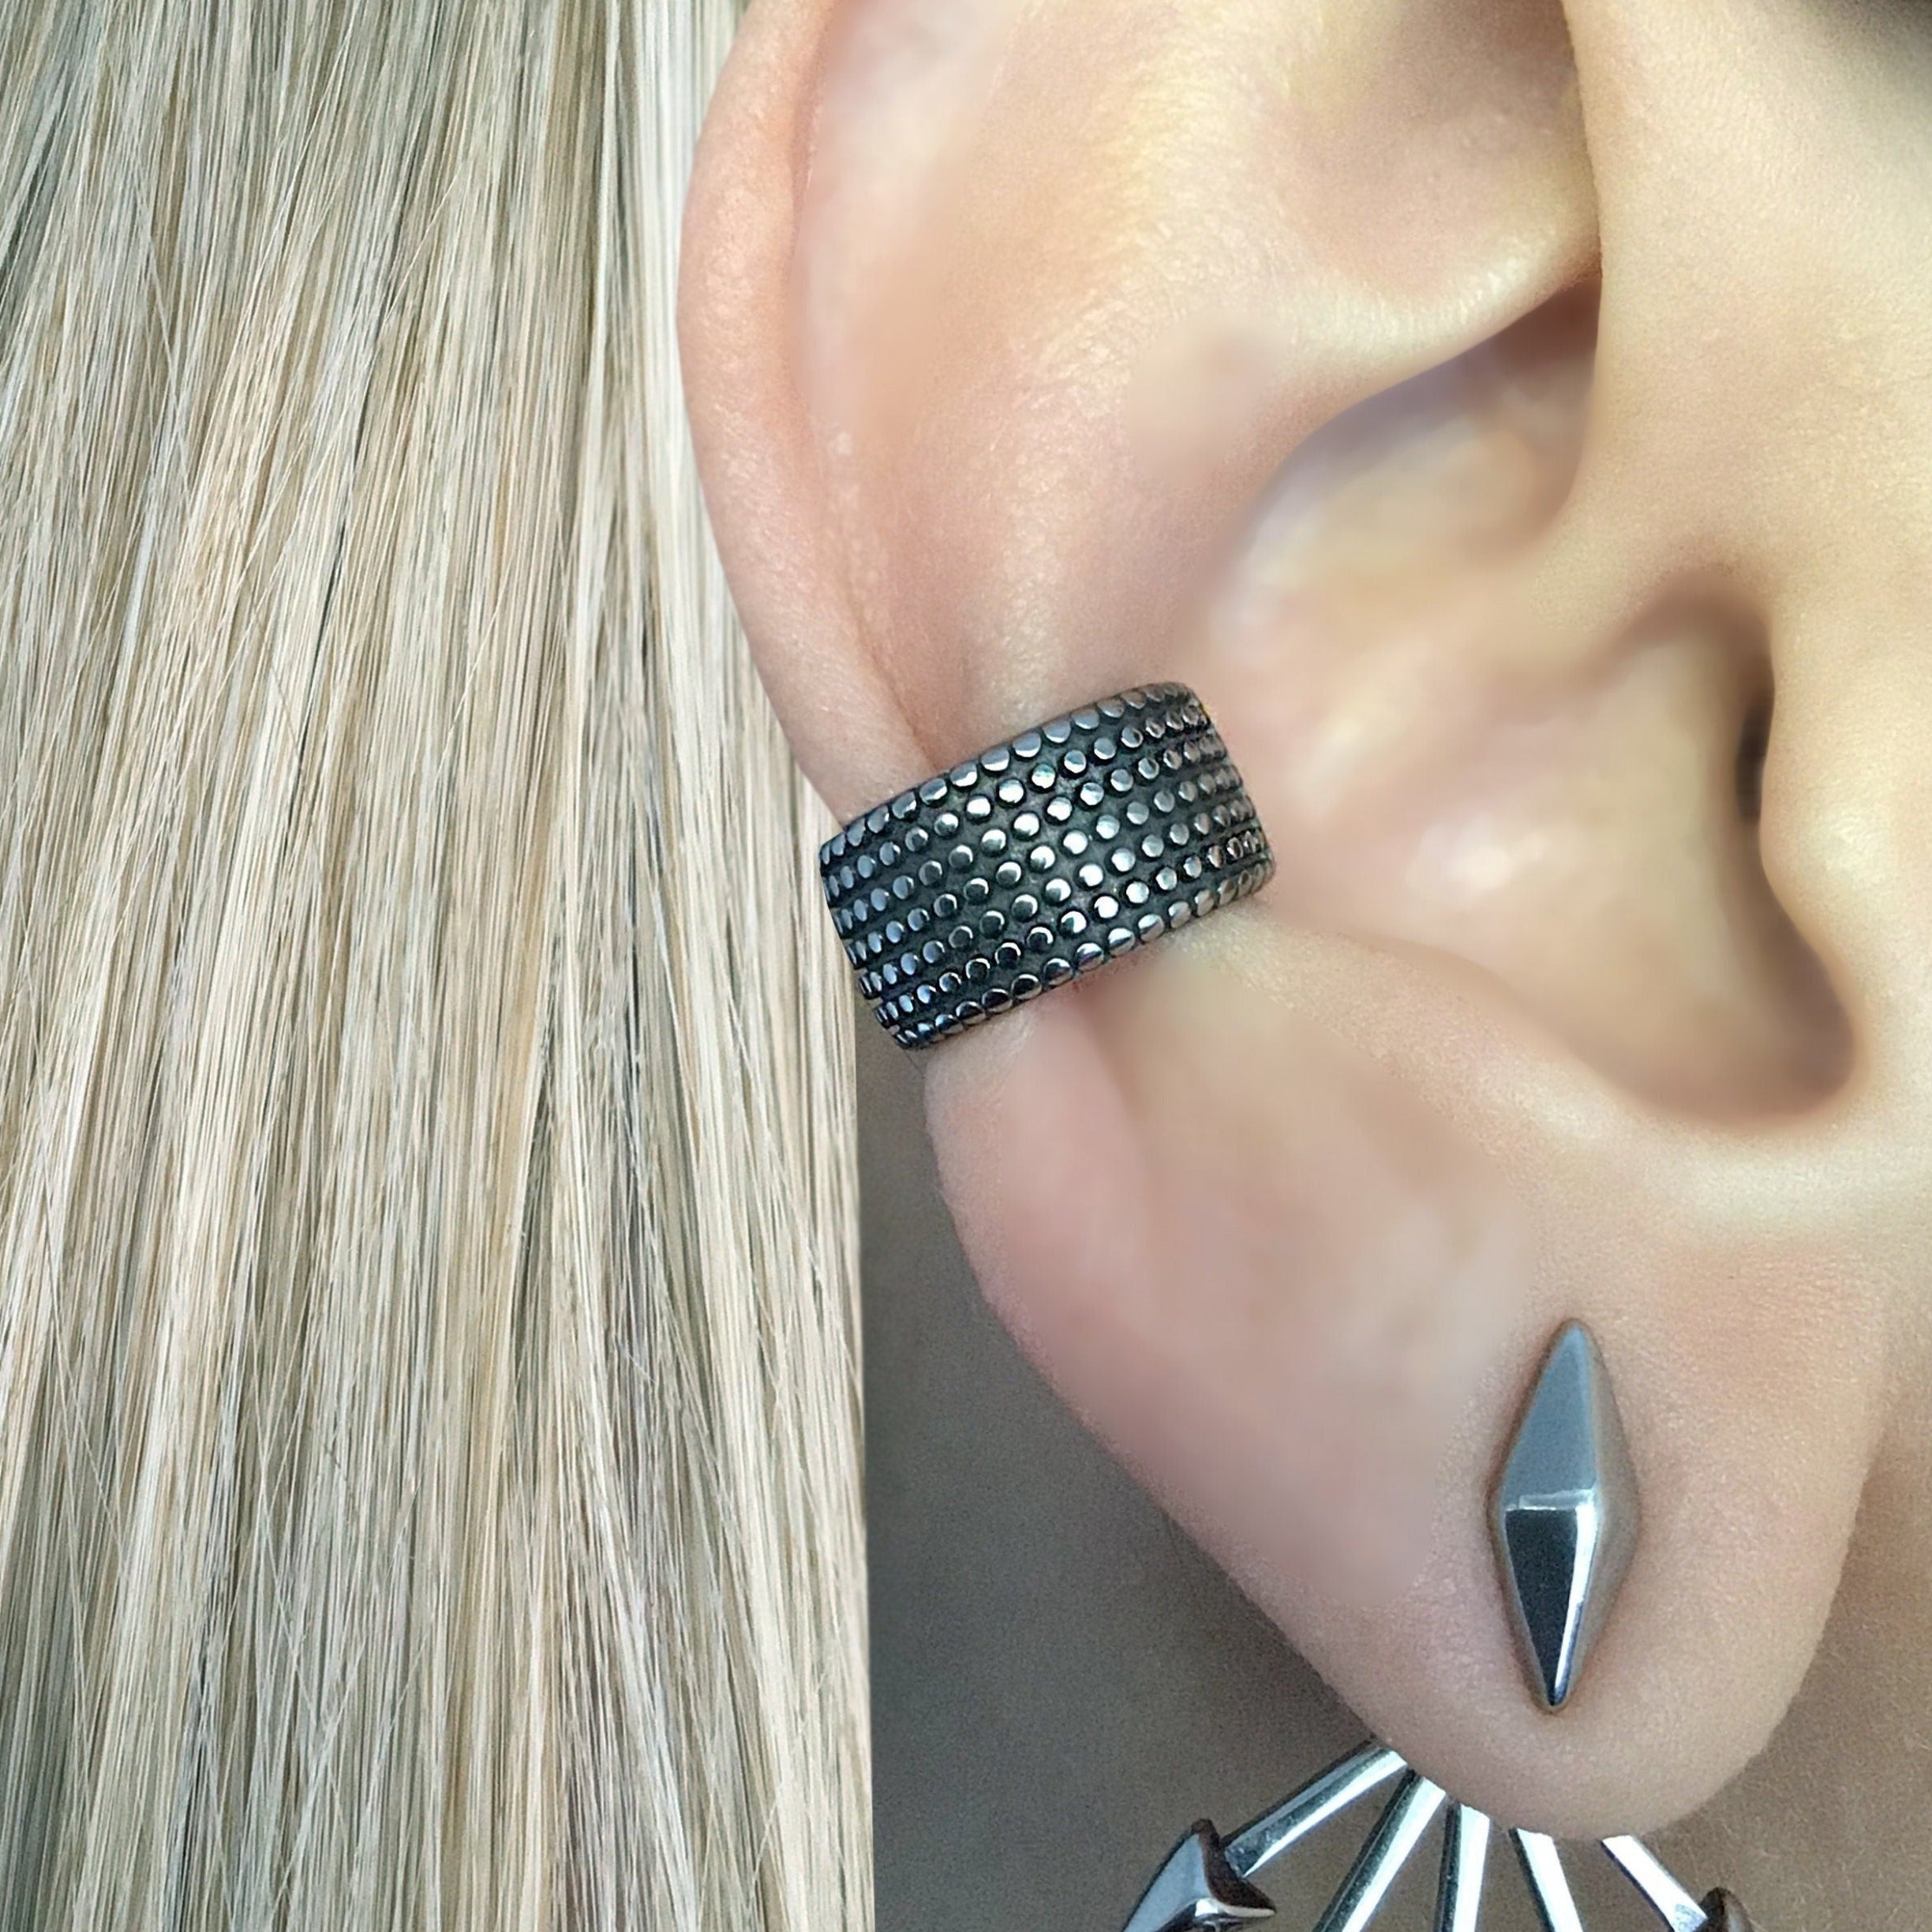 EAR CUFF WITH DOTTED DESIGN